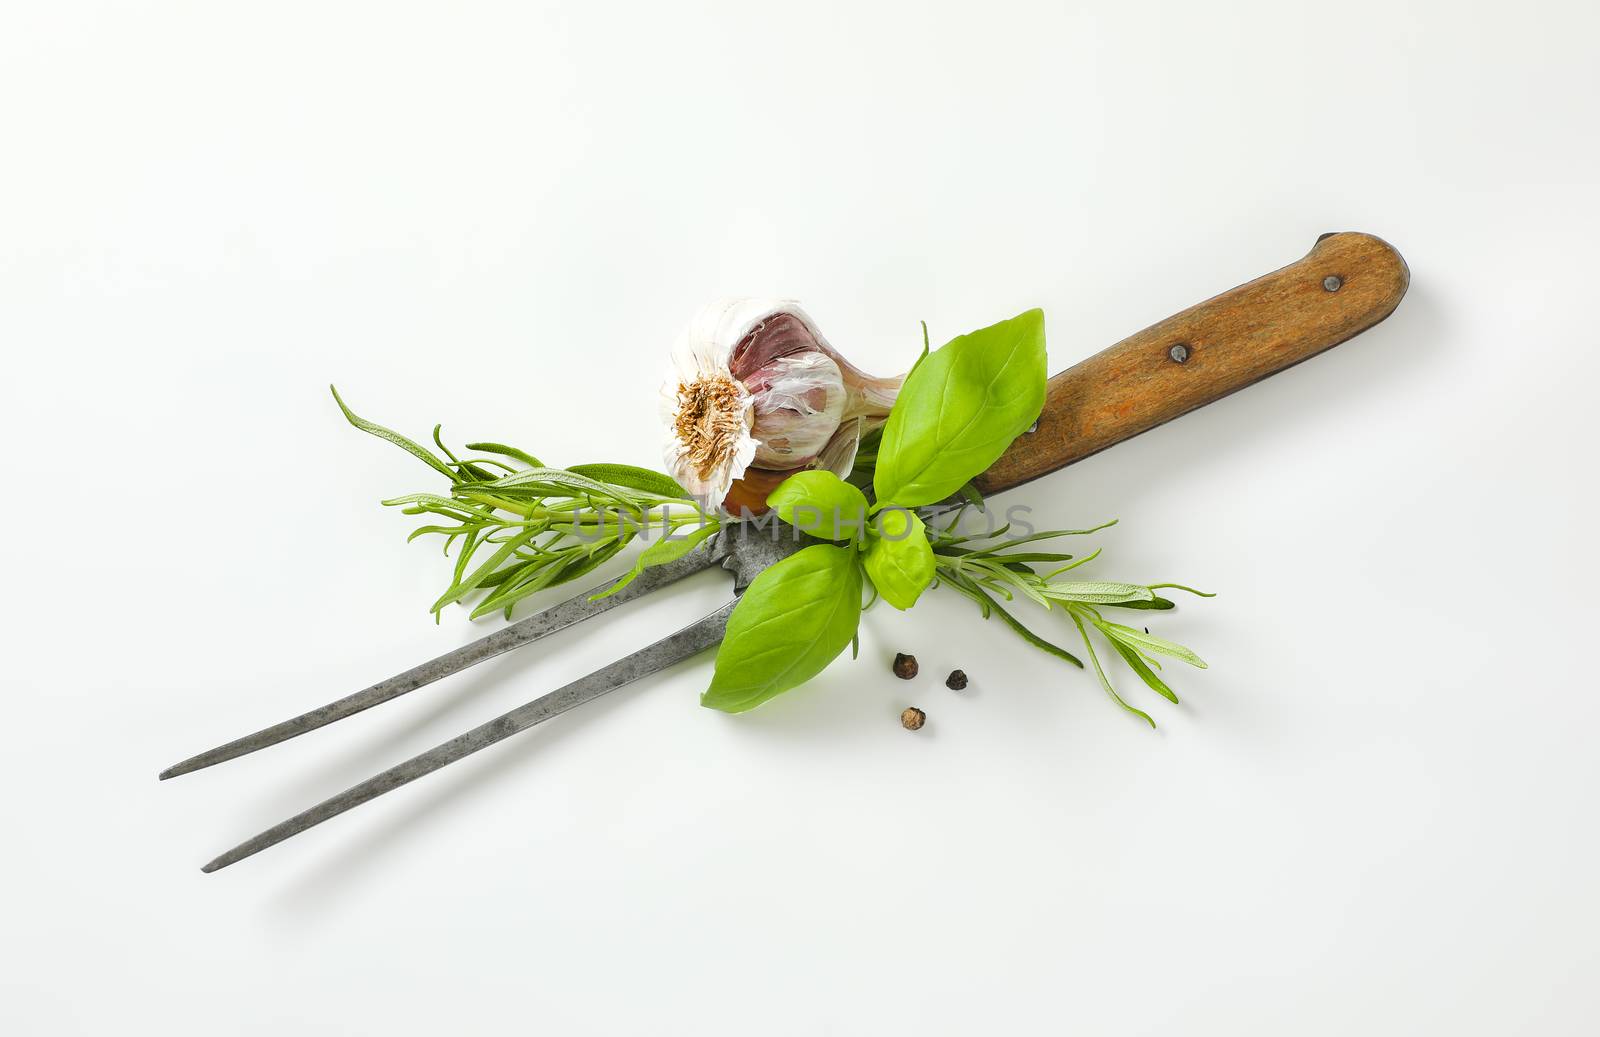 Old carving / meat fork, fresh culinary herbs, garlic and three peppercorns